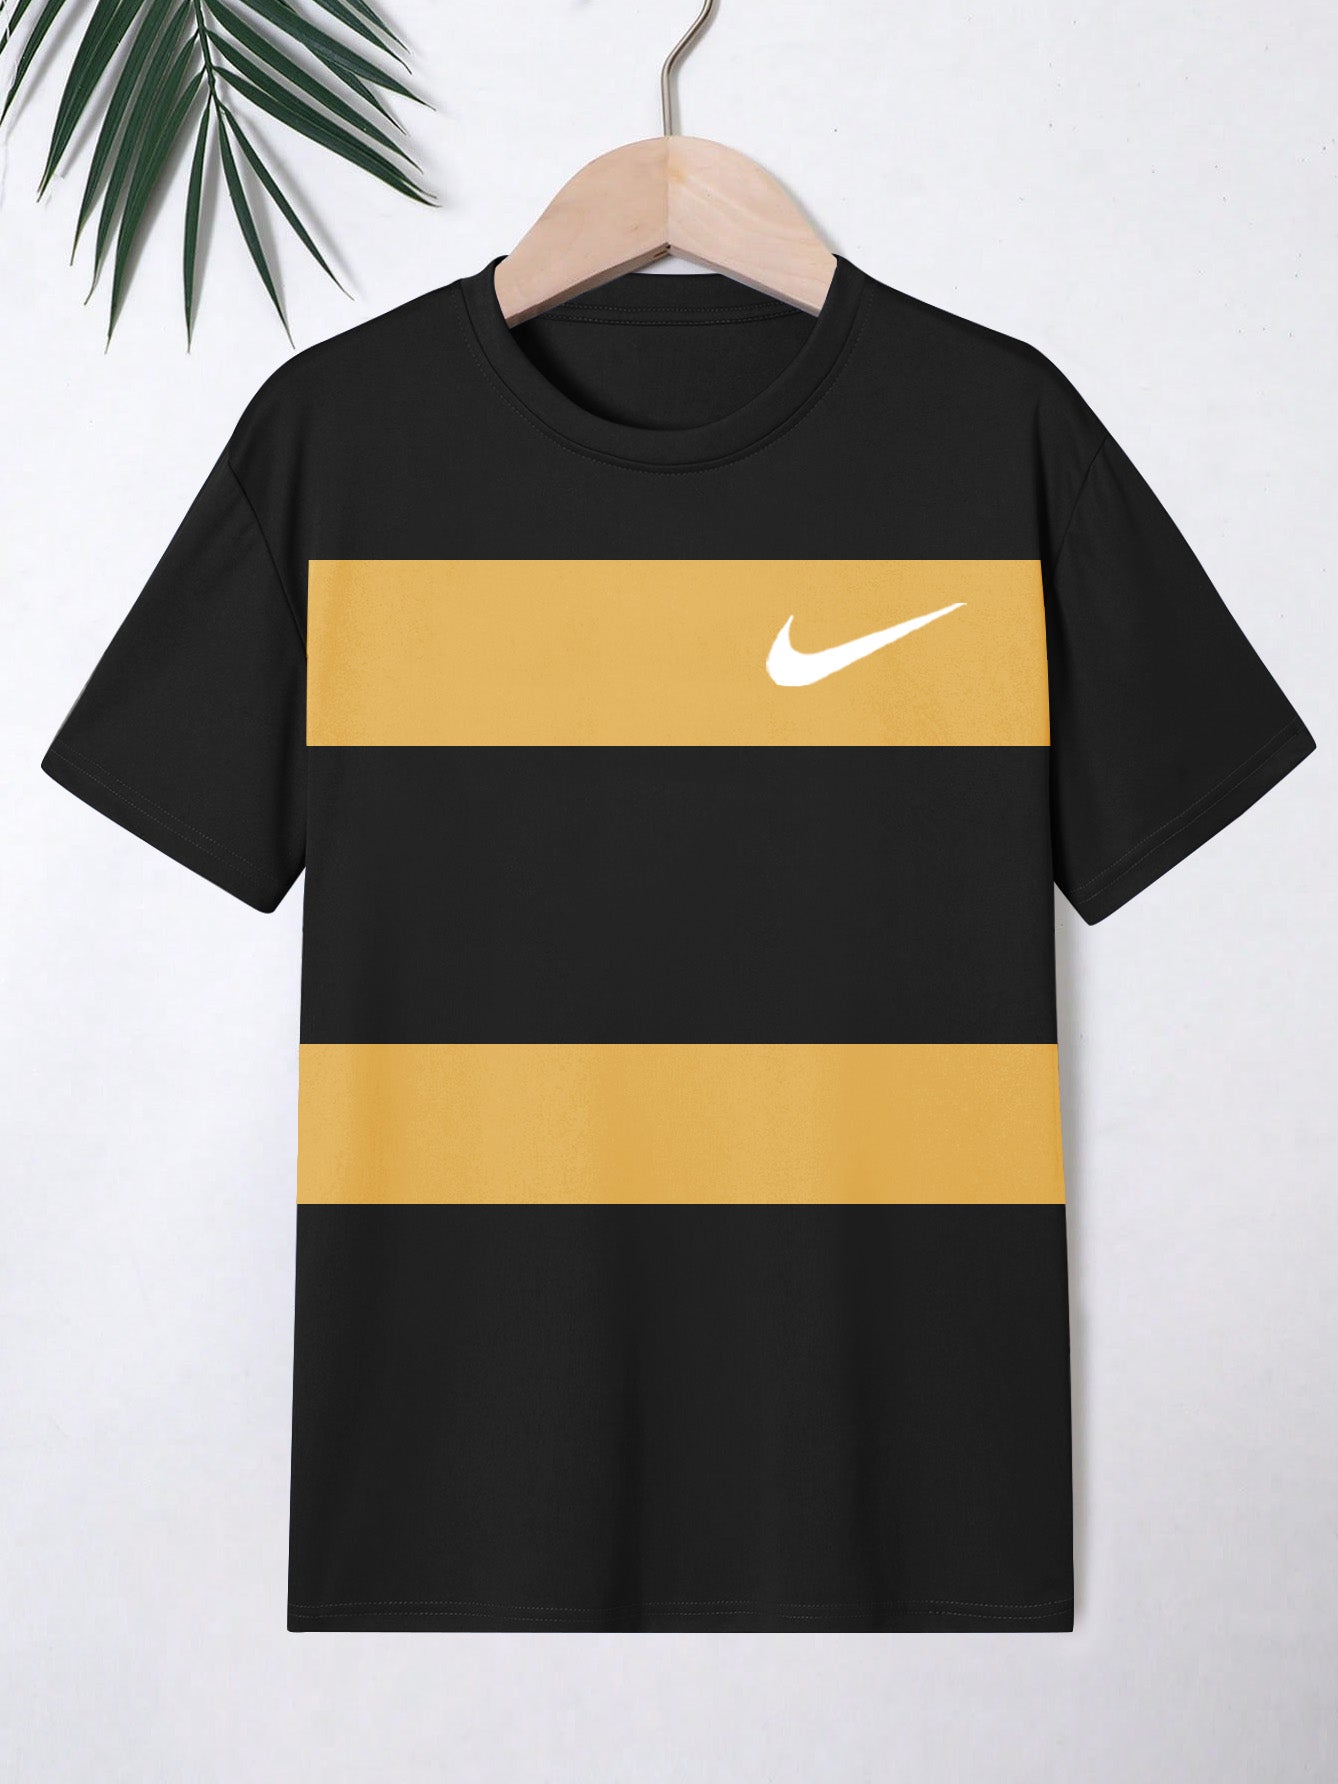 NK Crew Neck Single Jersey Tee Shirt For Kids-Black with Yellow Panels-SP2266